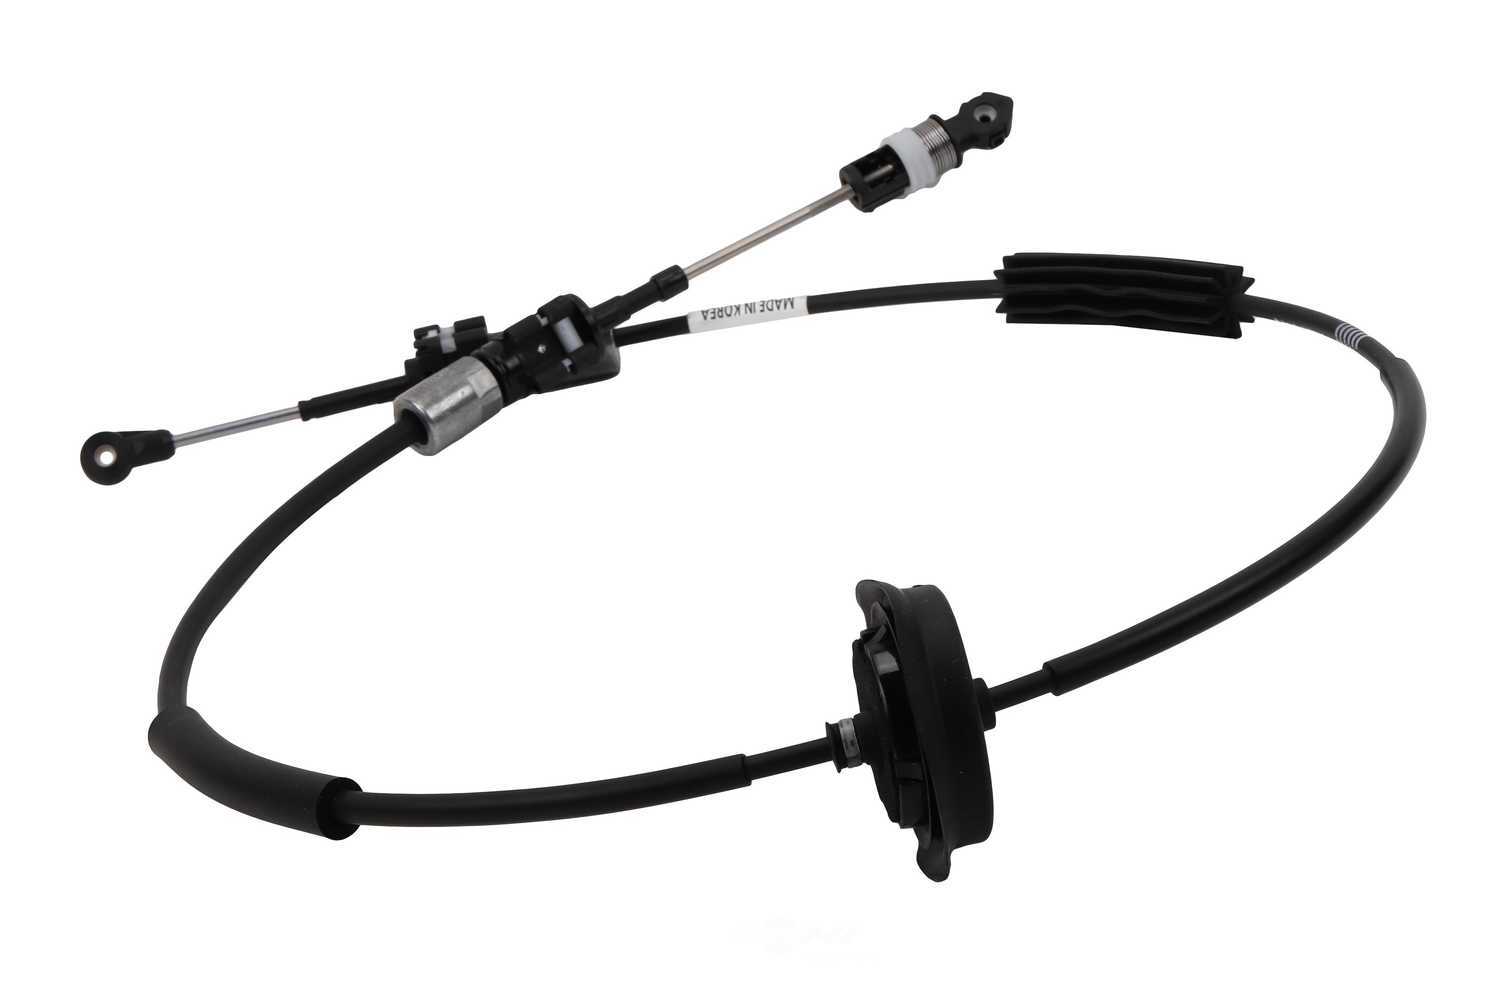 GM GENUINE PARTS CANADA - Automatic Transmission Shifter Cable - GMC 23295736